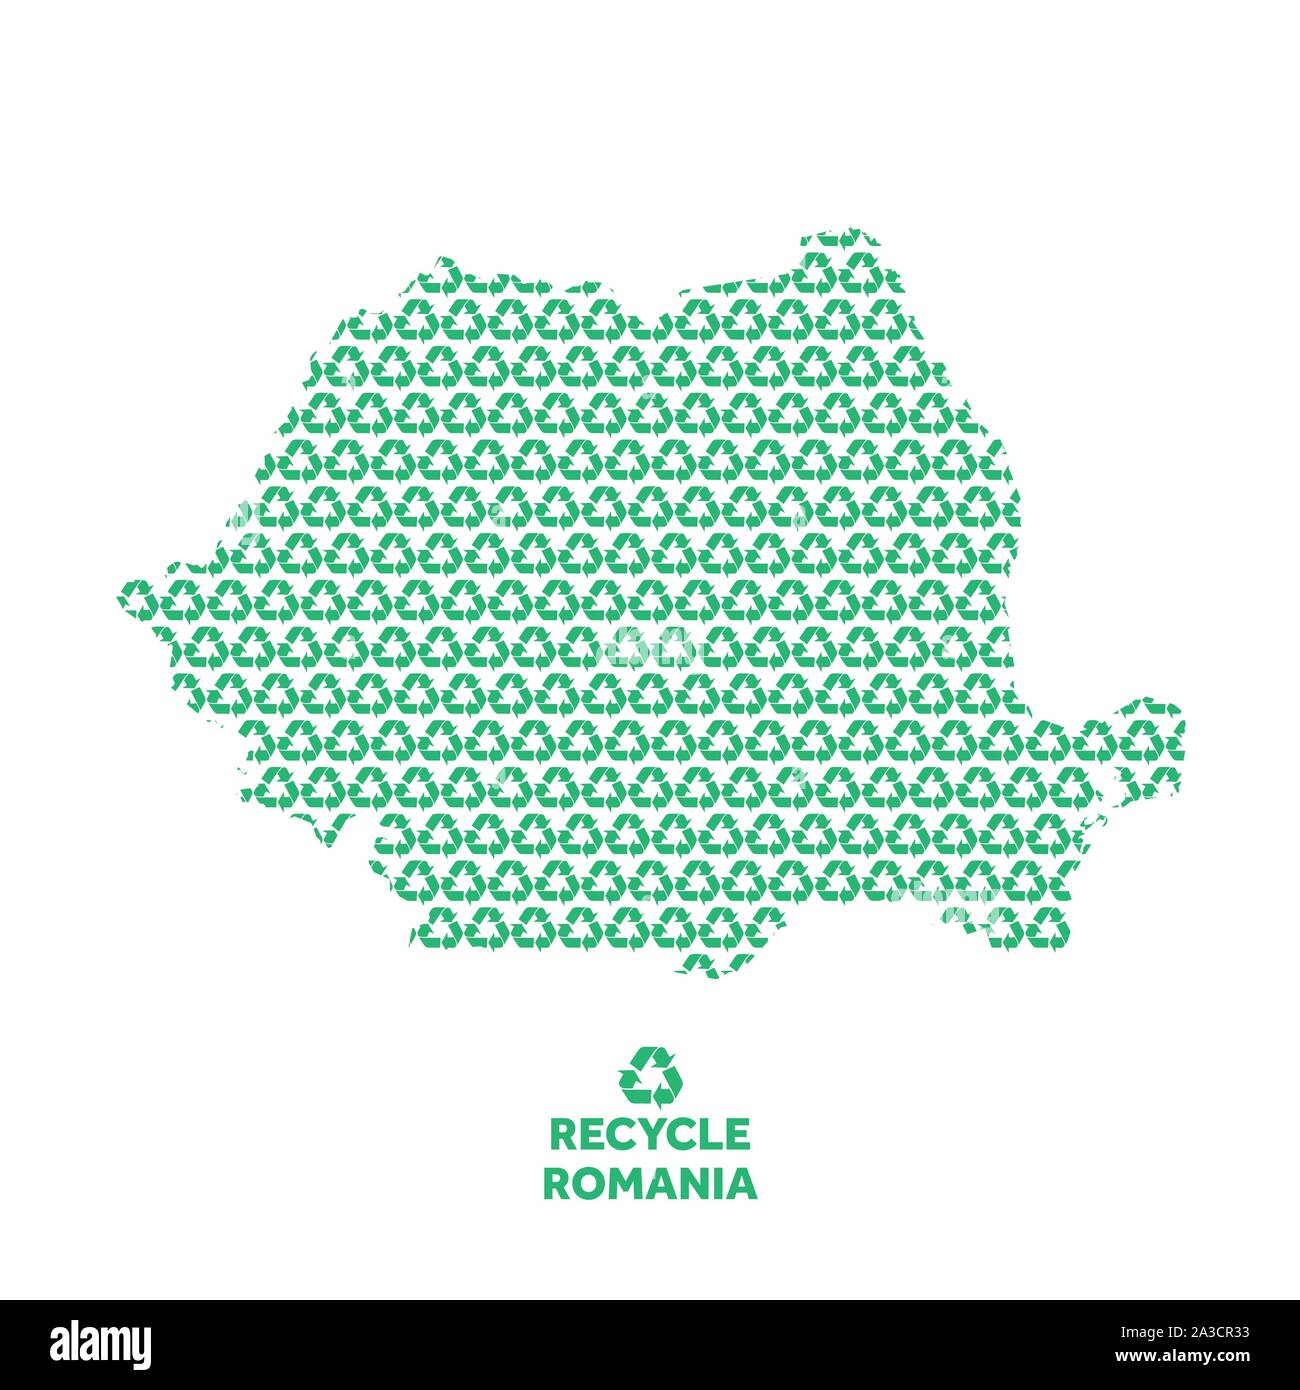 Romania map made from recycling symbol. Environmental concept Stock Vector